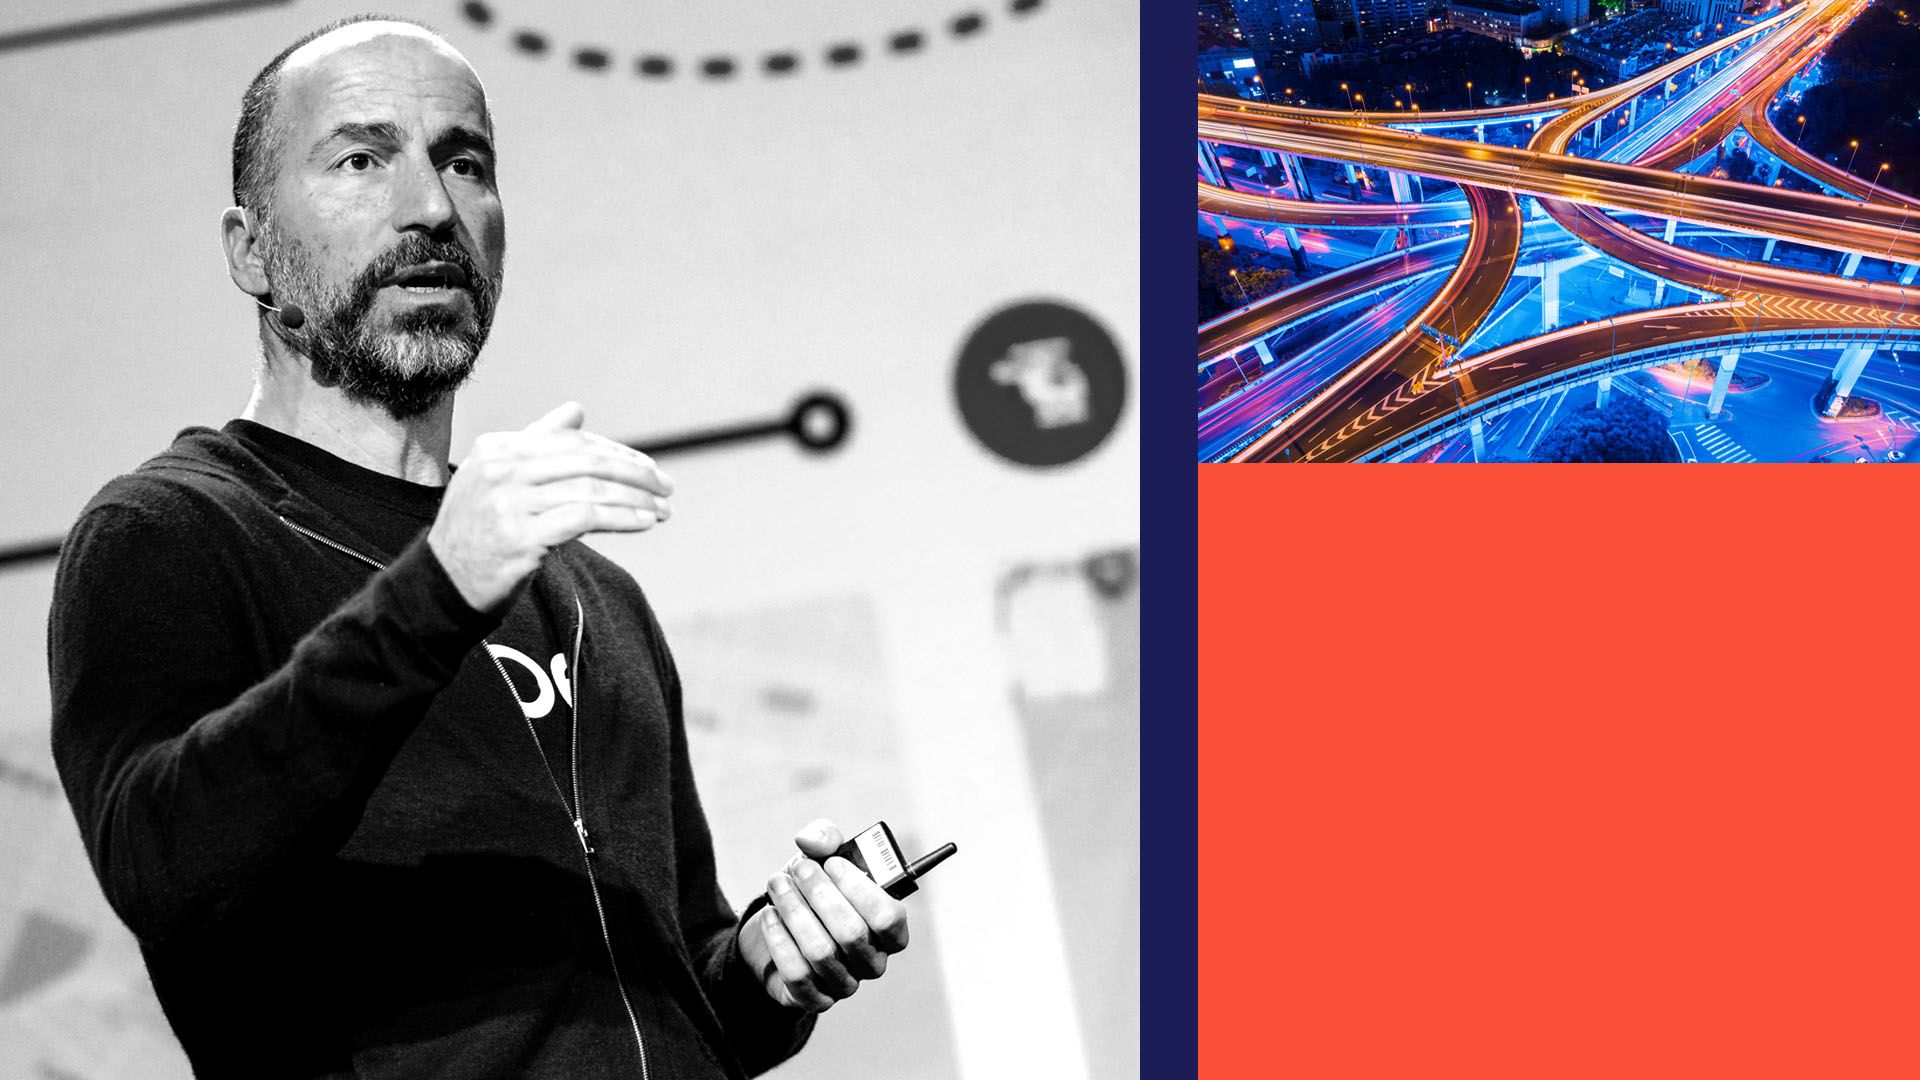 Photo illustration of Uber CEO Dara Khosrowshahi with an image of a highway and blocks of color.